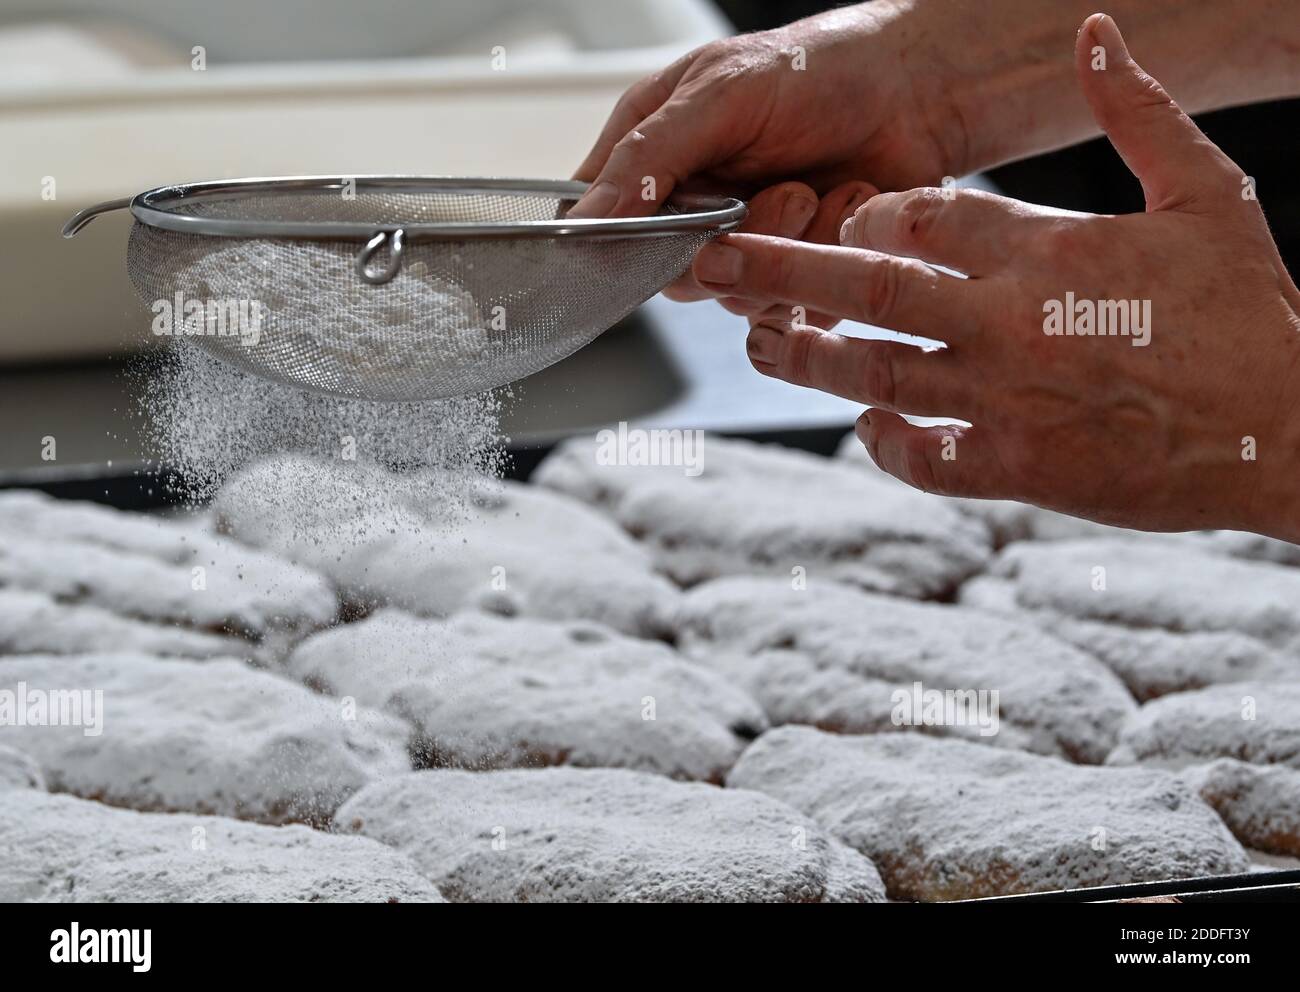 19 November 2020, Saxony-Anhalt, Klosterhäseler: Master baker Rolf Block sugars freshly baked Naumburg Stollen in his bakery in Klosterhäseler. Around 5000 pieces of the traditional Christmas cake leave the bakery this year. The Corona pandemic is also having an effect here, so the café of the bakery and confectionery is currently closed, but the online shop is doing much better. The special feature of his Naumburg Stollen are the dried and kirsch-soaked sweet cherries, which are added to the dough in place of the sultanas. Photo: Hendrik Schmidt/dpa-Zentralbild/ZB Stock Photo